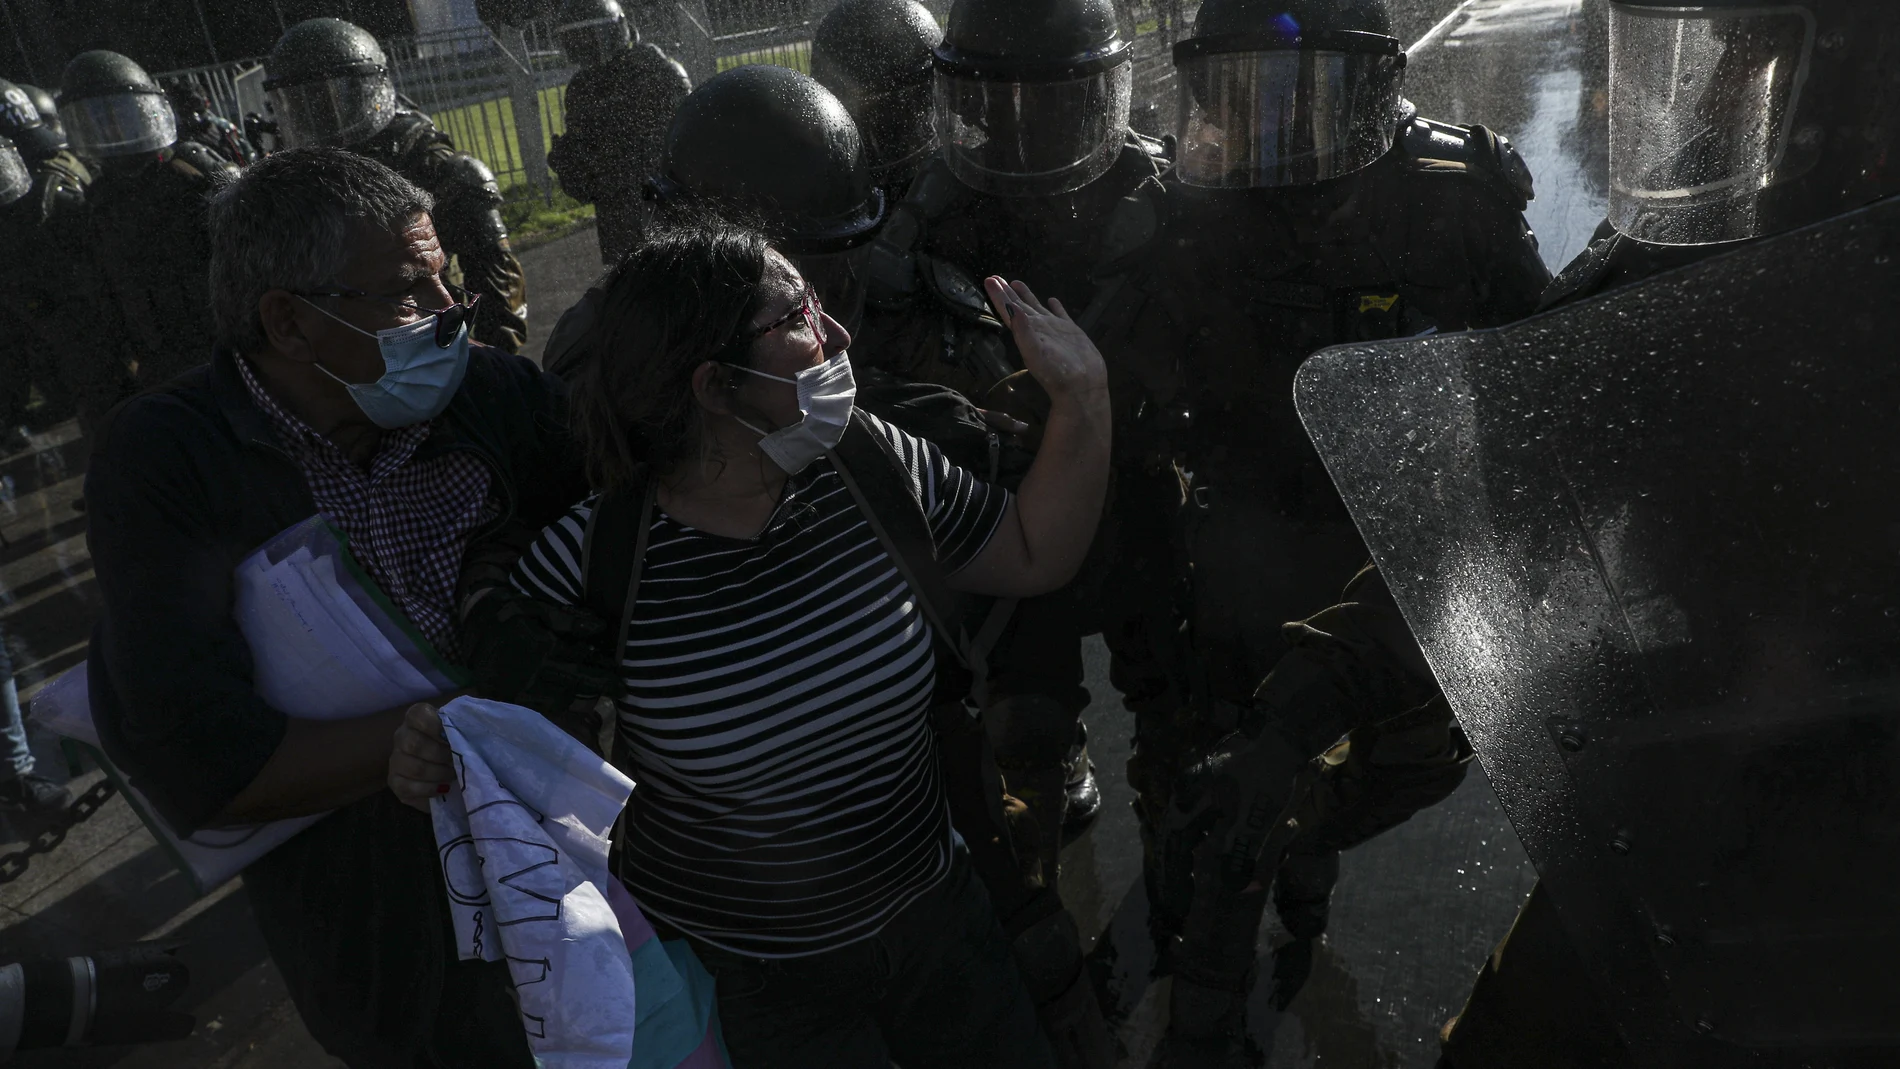 A couple of demonstrators scuffle with police outside of La Moneda presidential palace during a protest against President Sebastian Pi��era, demanding his resignation, in Santiago, Chile, Wednesday, Nov. 18, 2020. (AP Photo/Esteban Felix)